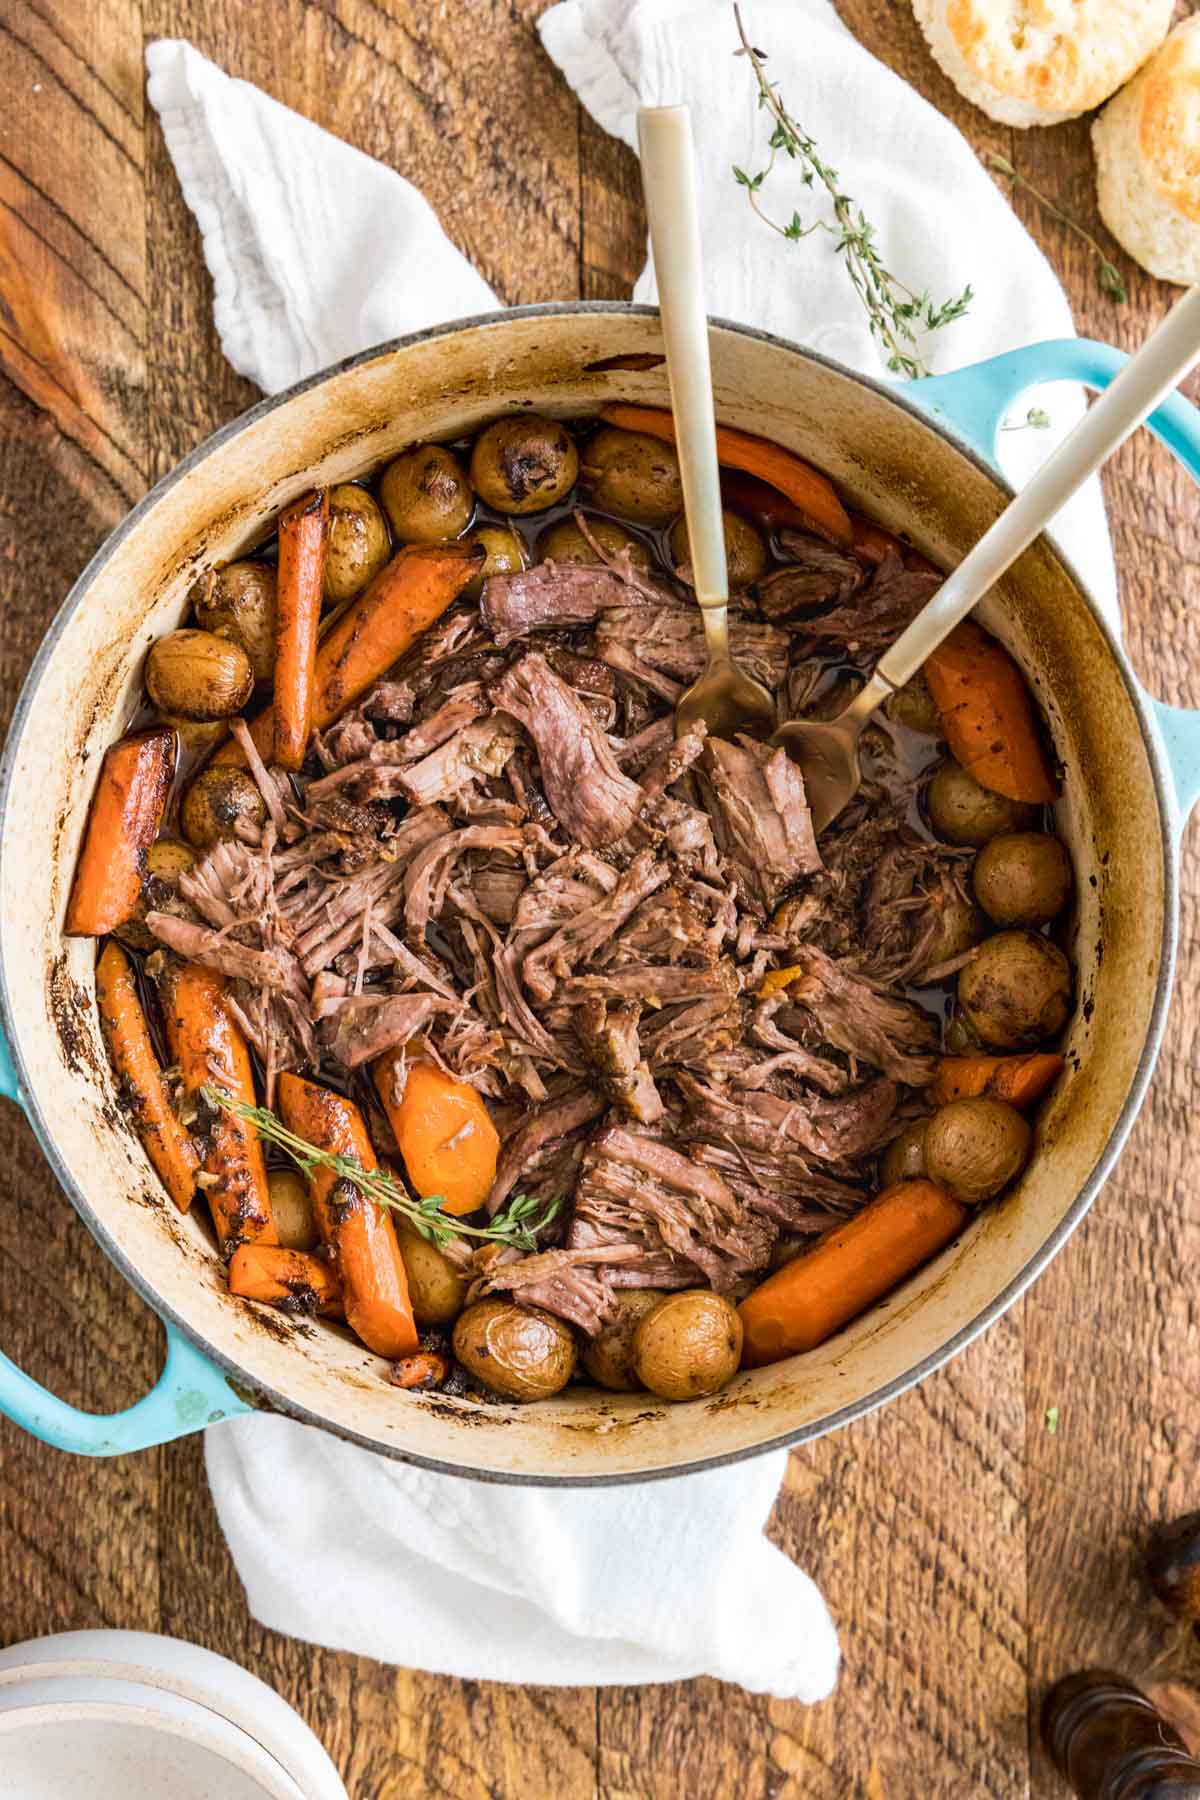 The Best Dutch Oven Pot Roast (Slow Cooker Option!) - All the